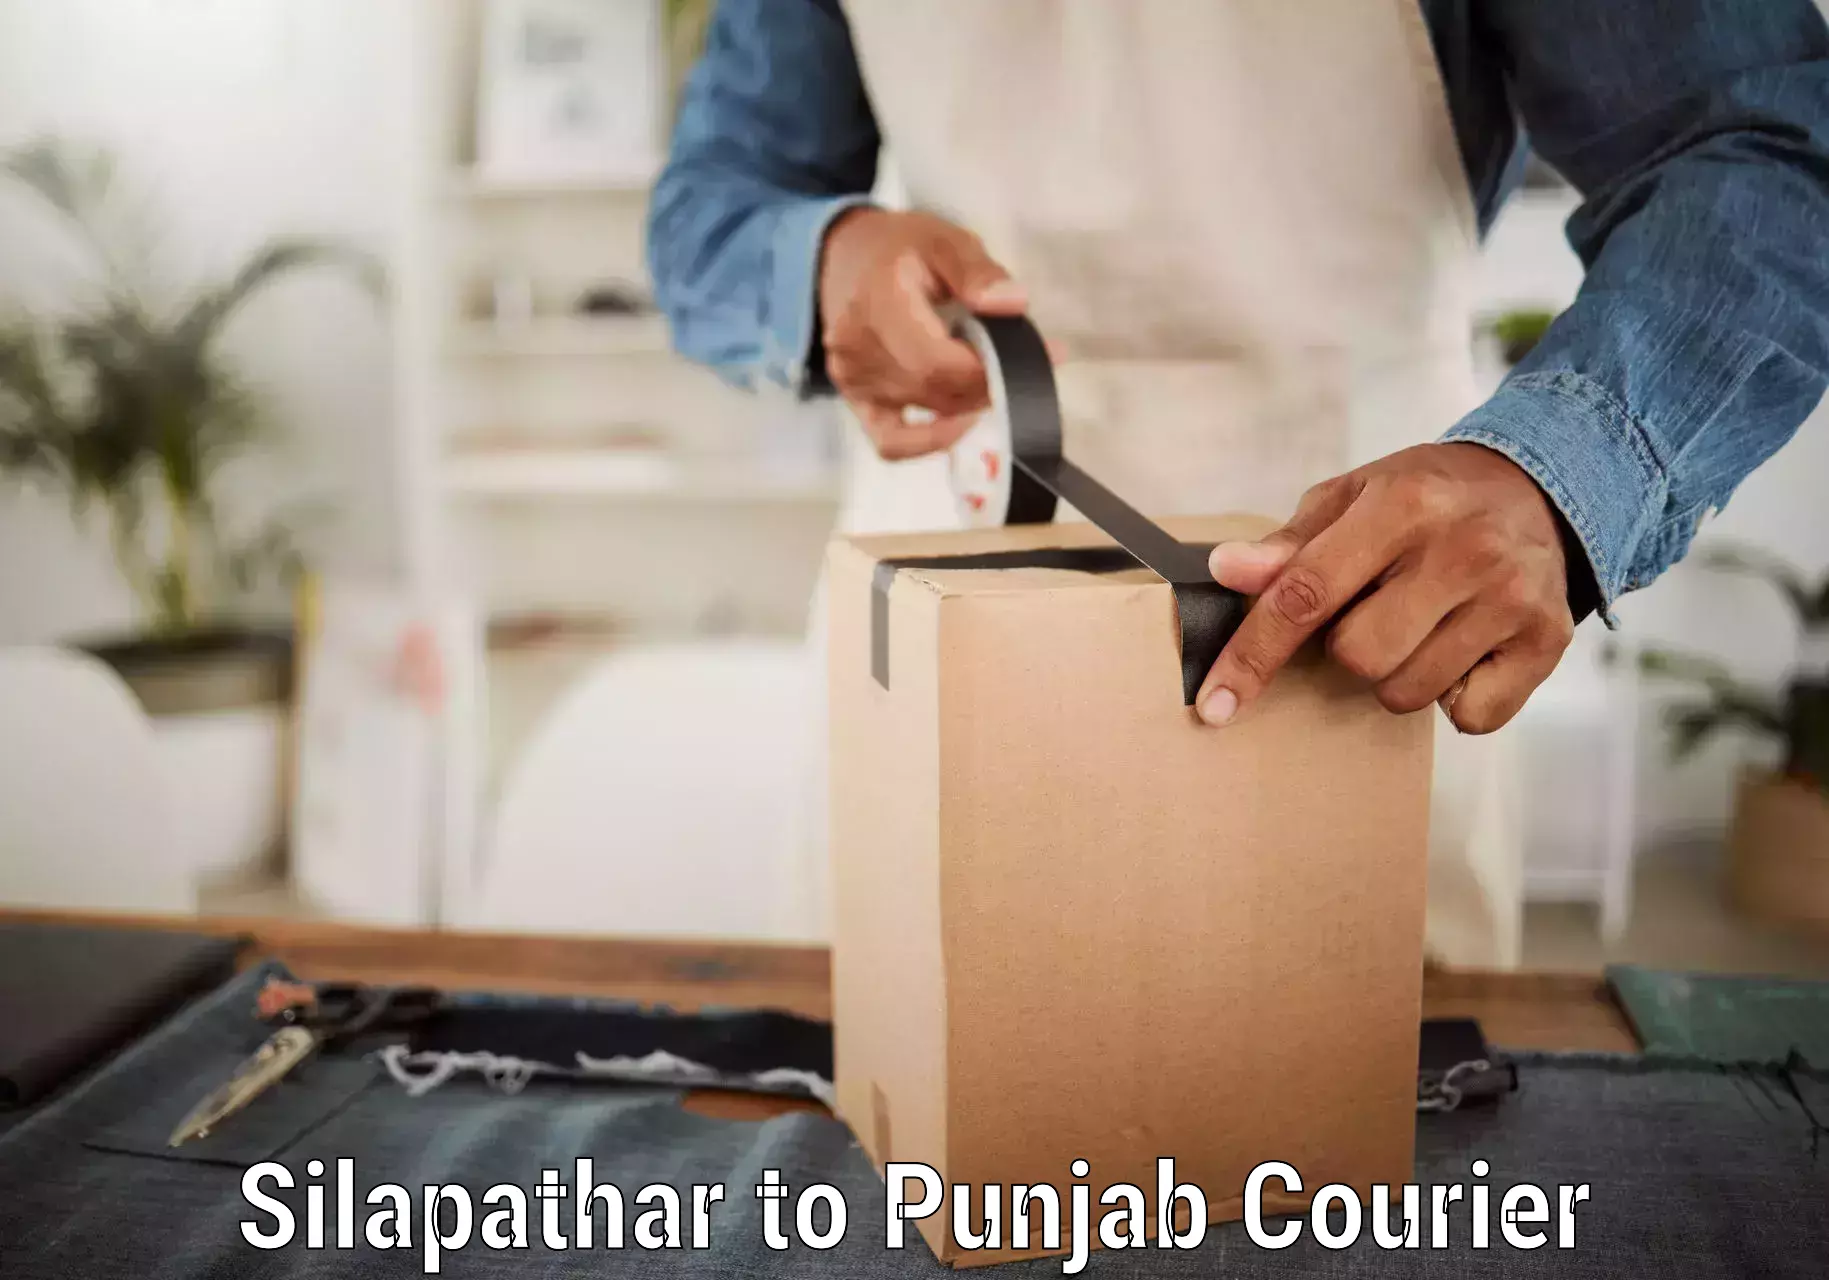 Cargo delivery service Silapathar to Punjab